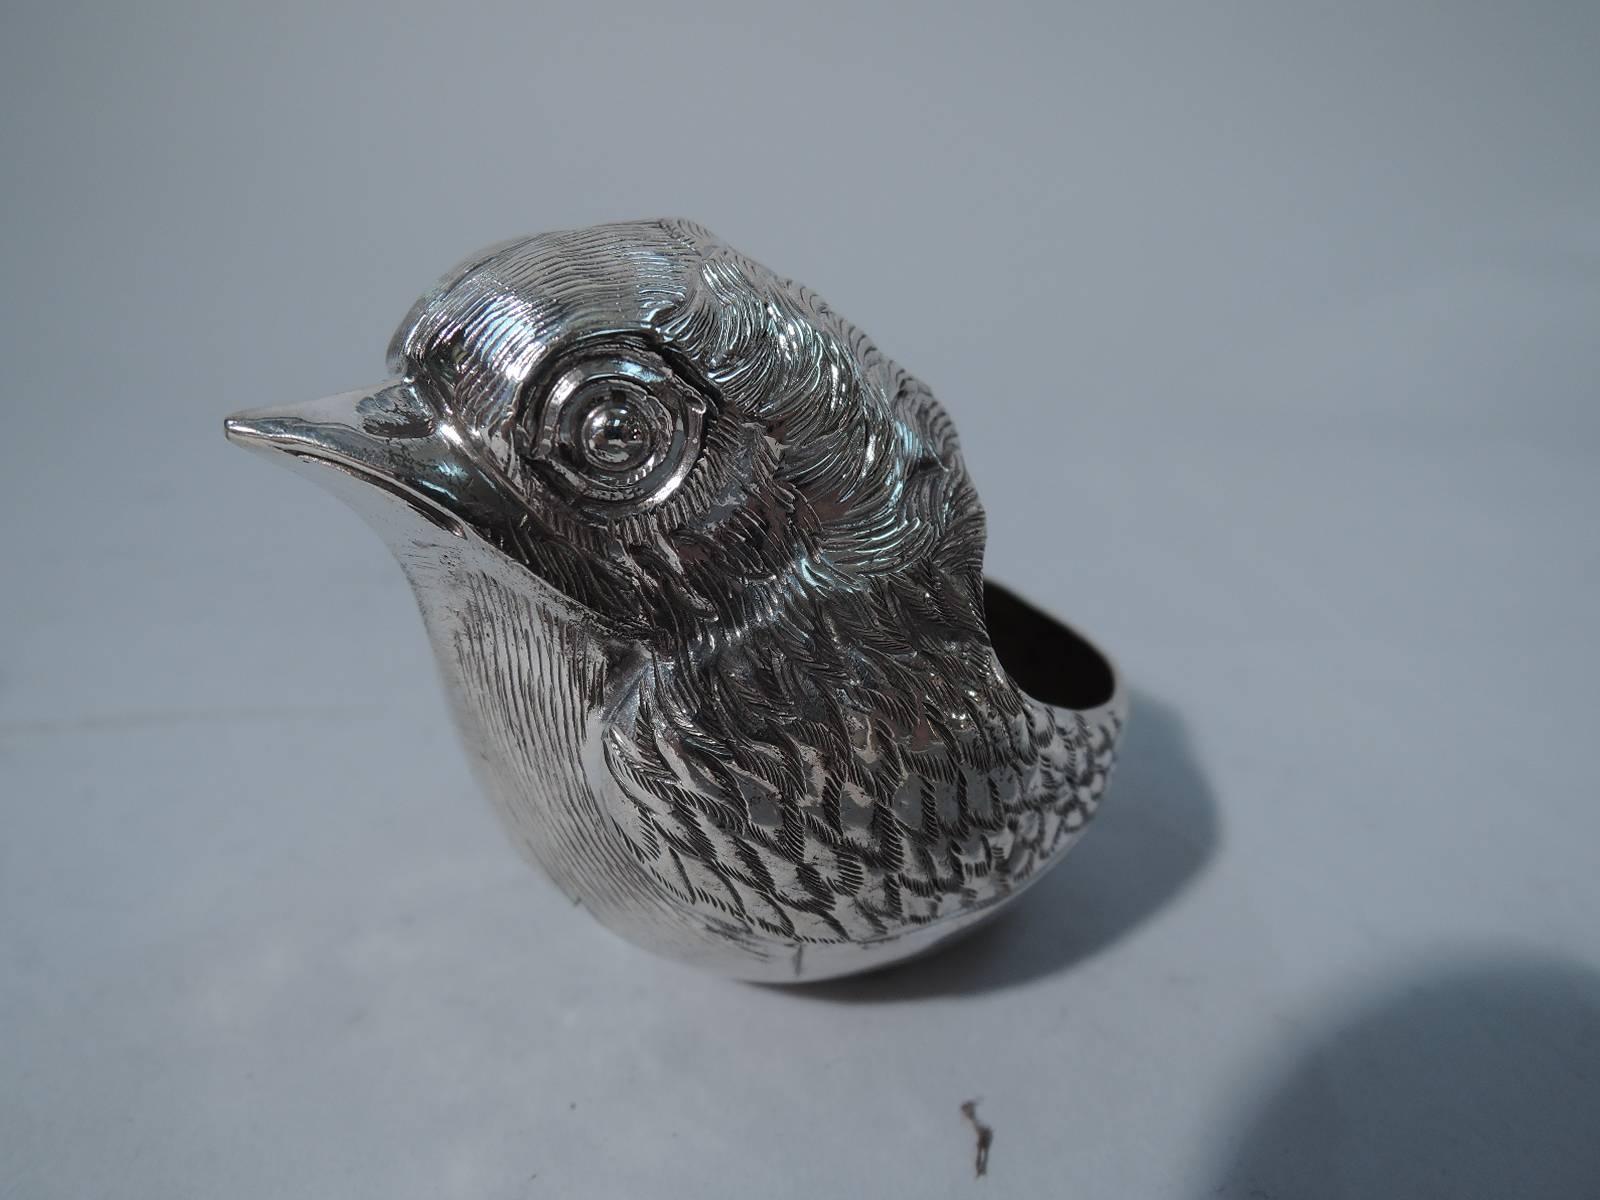 Pair of antique sterling silver open salts in form of baby chicks. Each: round body with downy feathers and small upturned beak. Hollow with open back. Adorable. Indistinct hallmark.

Dimensions: H 2 3/4 x W 3 1/8 x D 2 in. Total weight: 3.1 troy